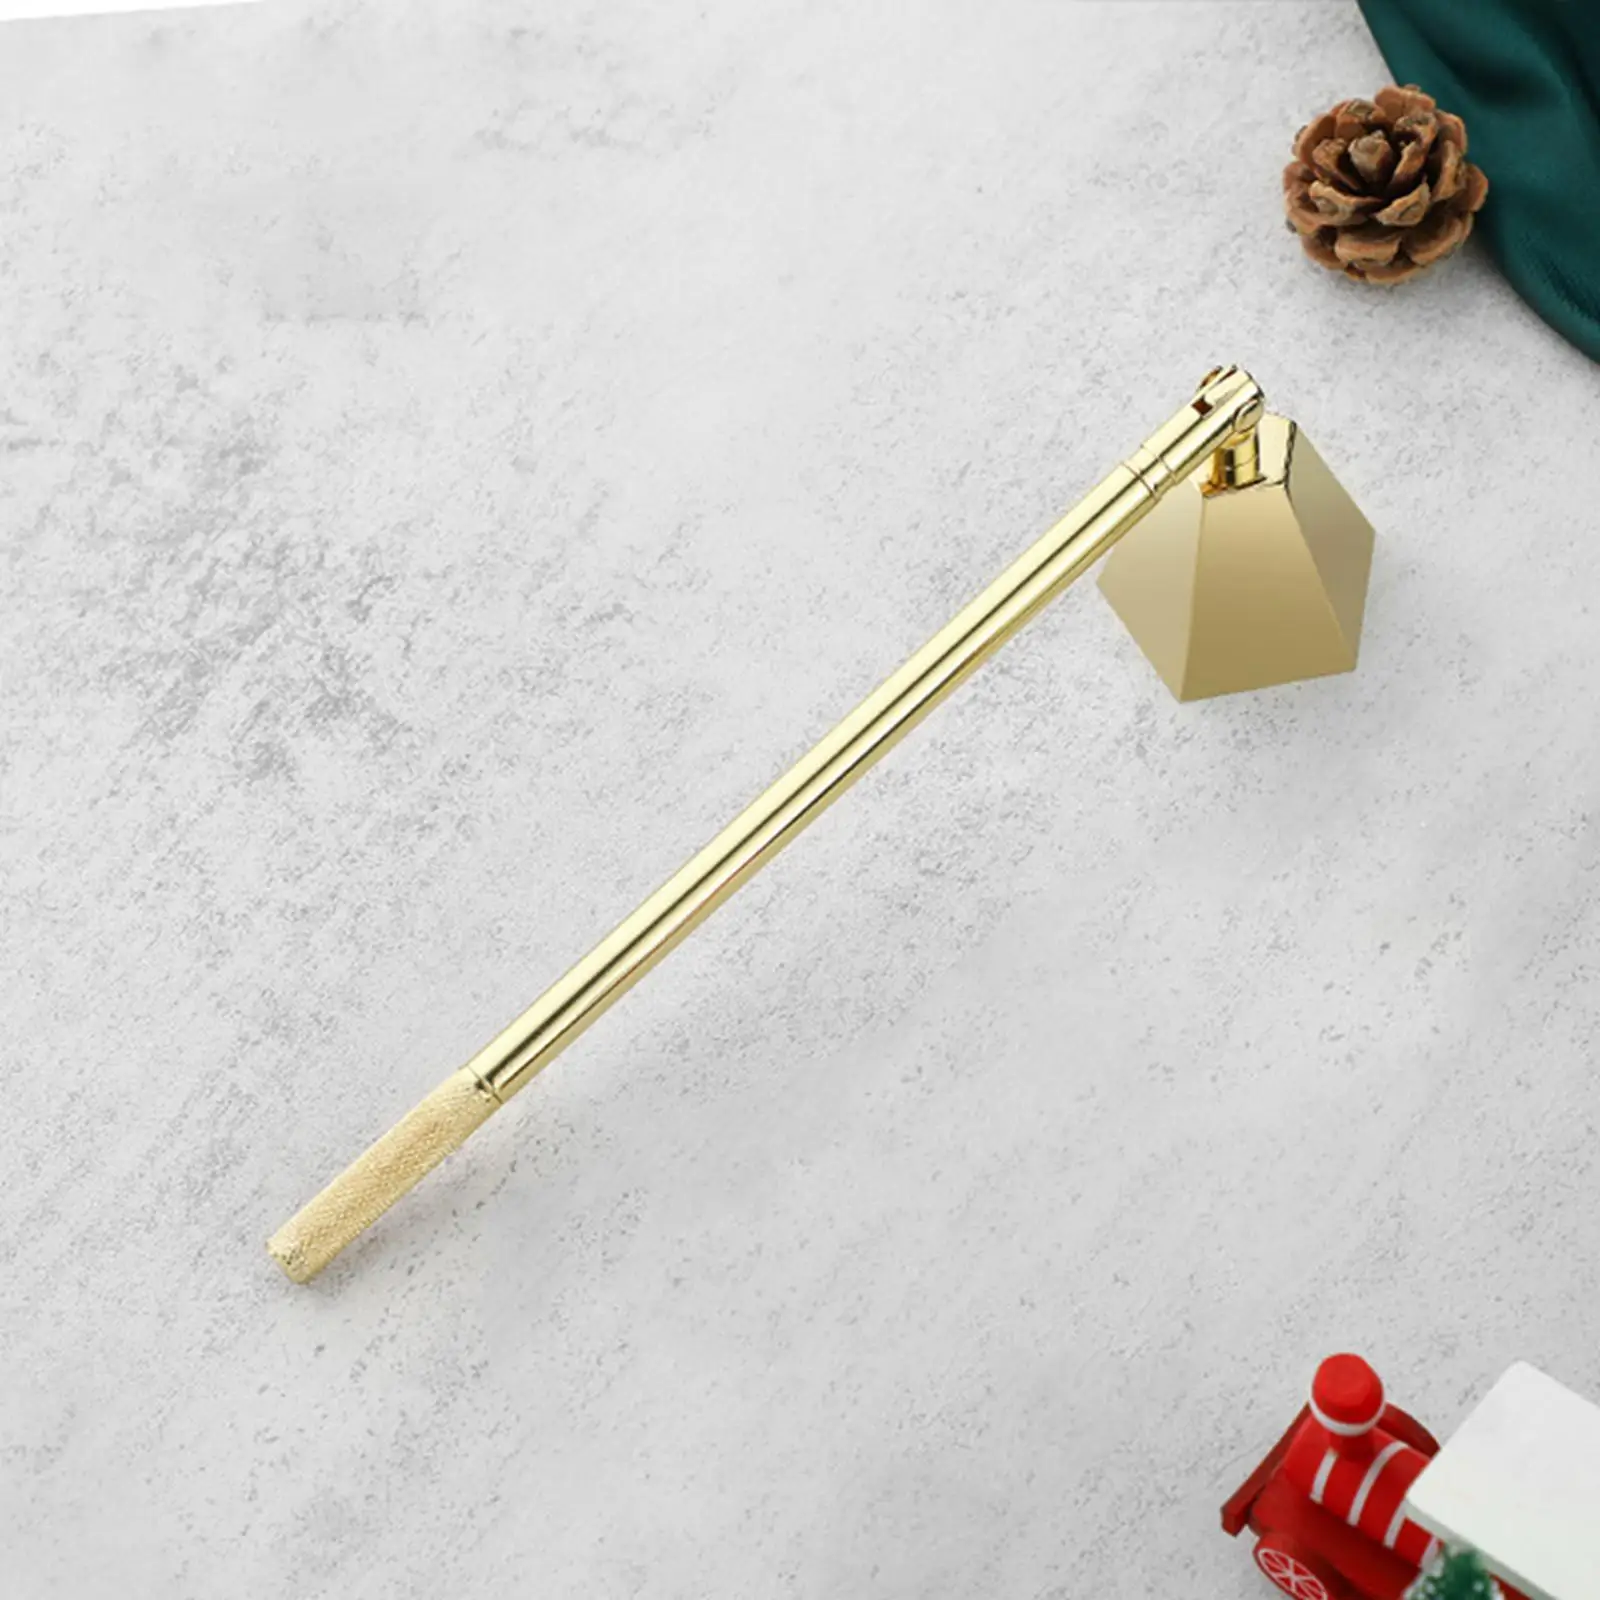 Candle Snuffer Candle Wick Cover Wick Flame Snuffer Extinguish Tool with Long Handle Tool for Party Holiday Thanksgiving Decor